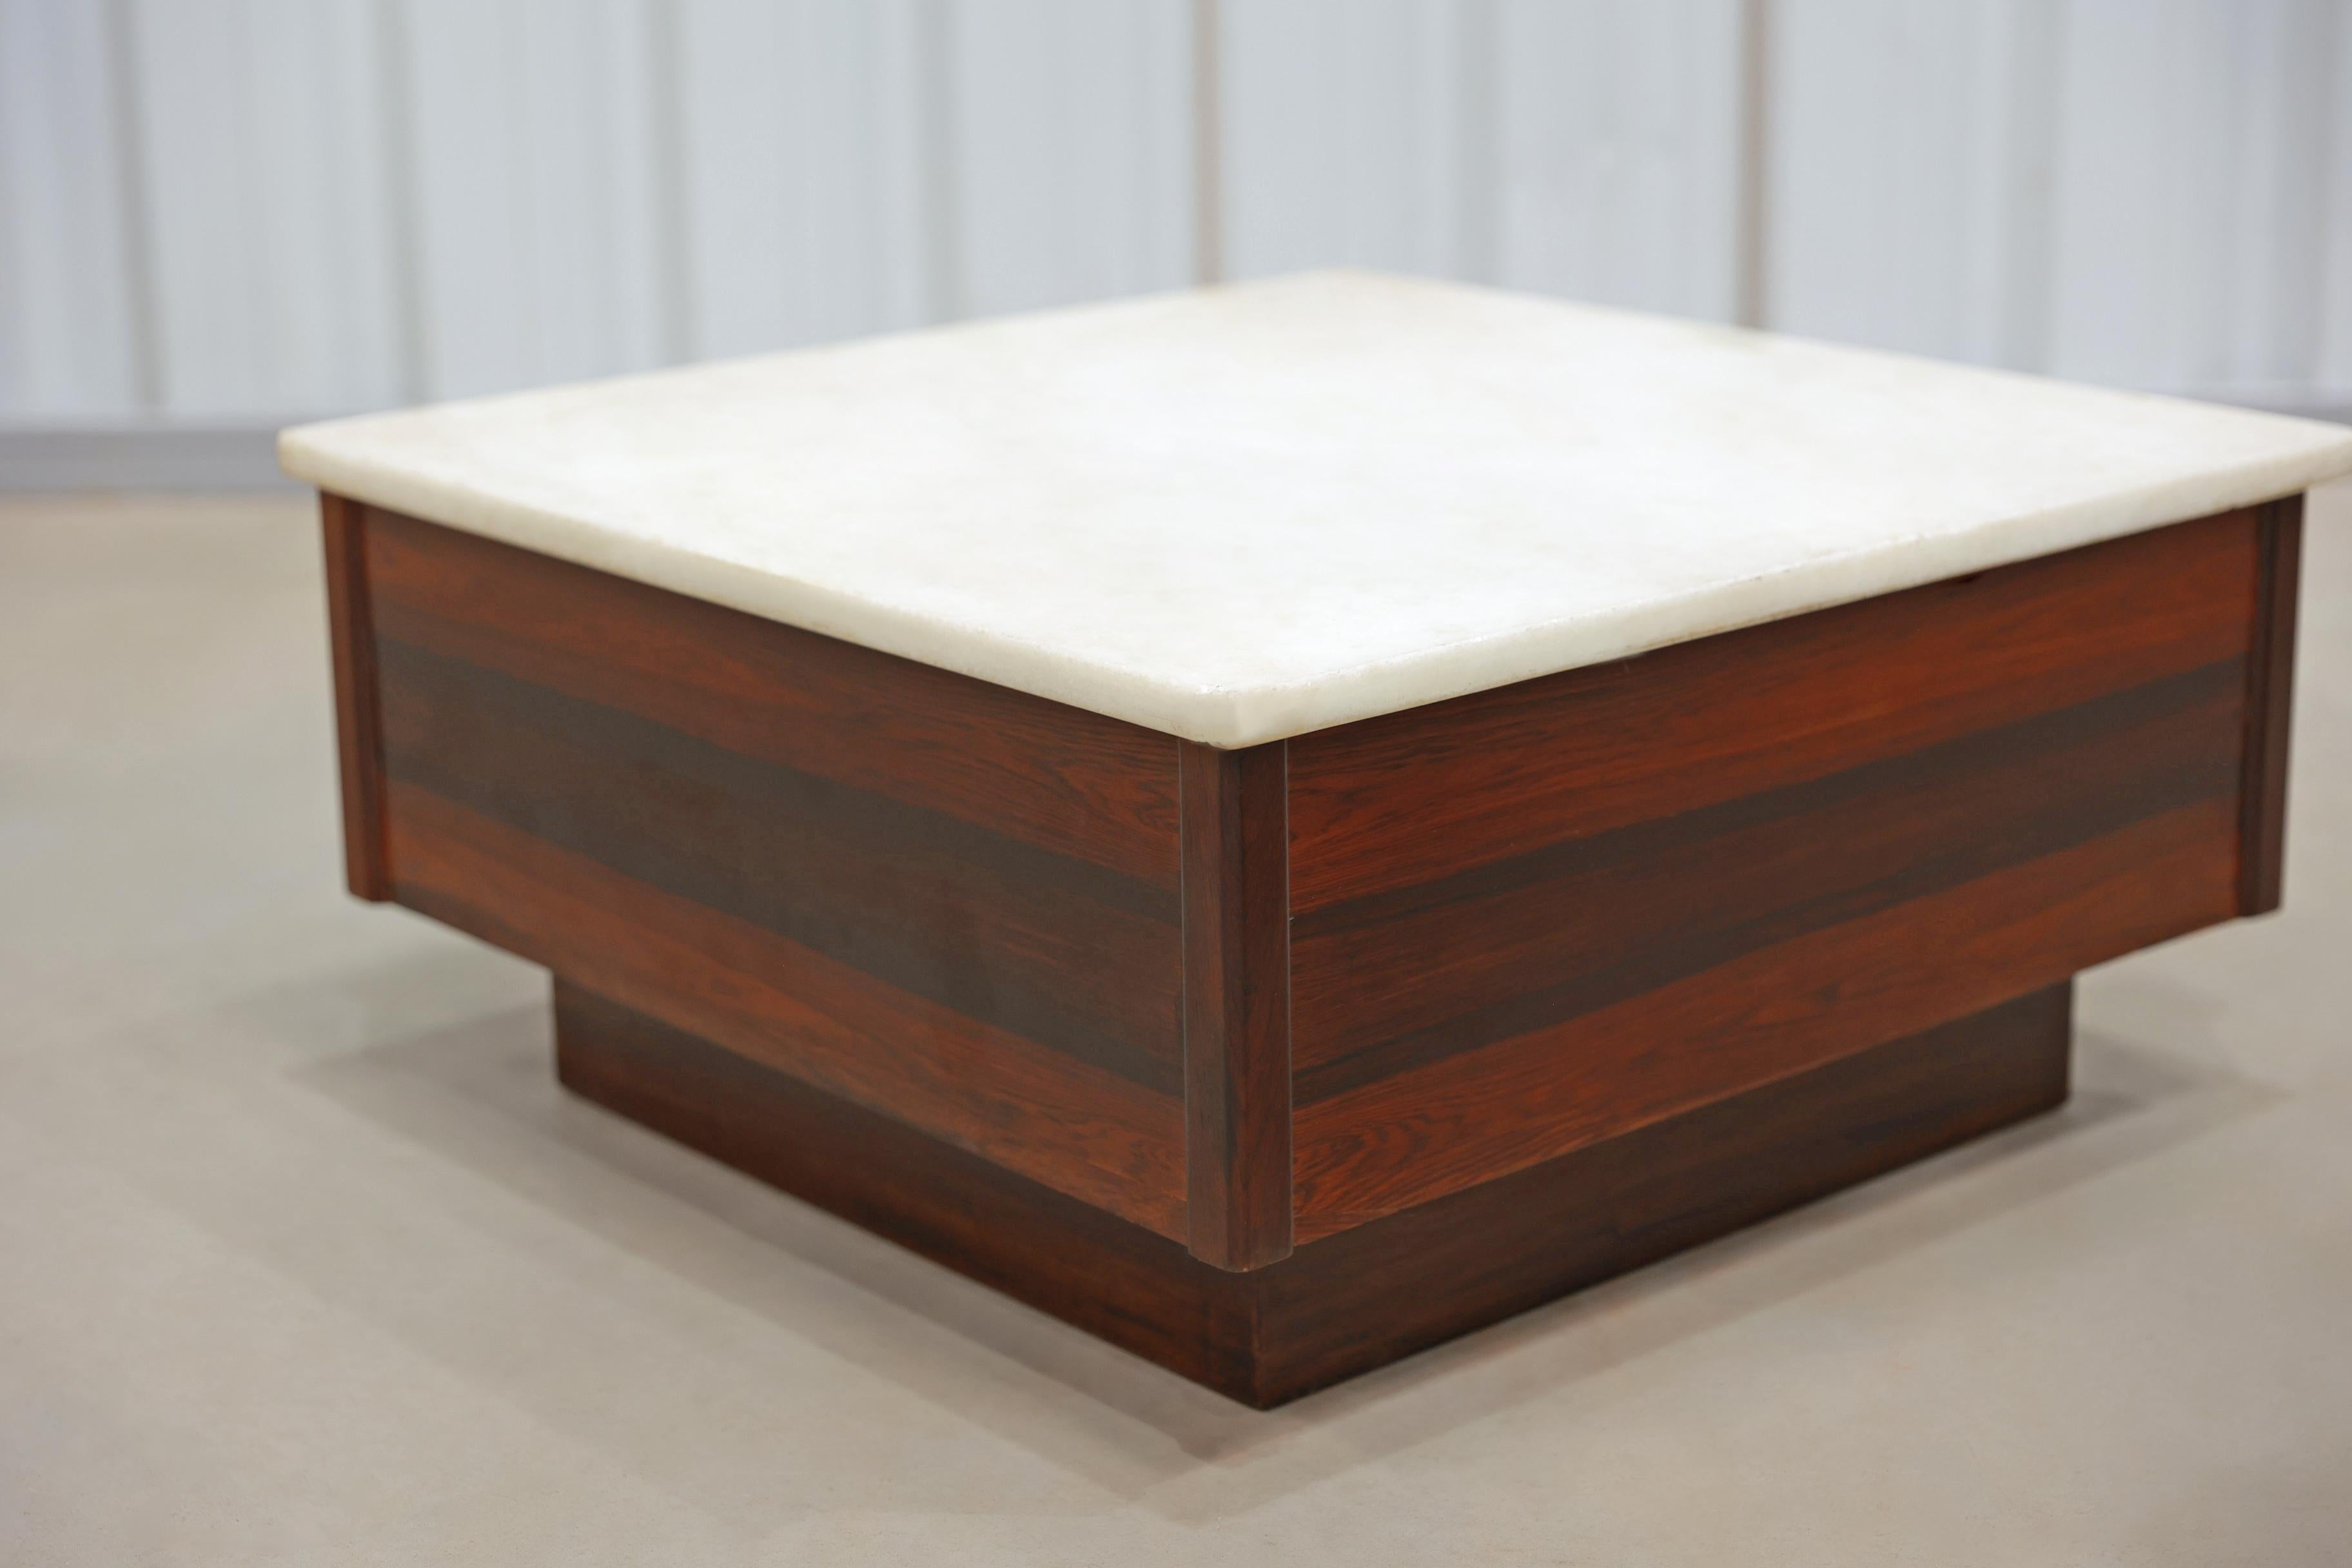 20th Century Brazilian Modern Coffee Table in Hardwood & Marble Top, Unknown, c. 1960 For Sale